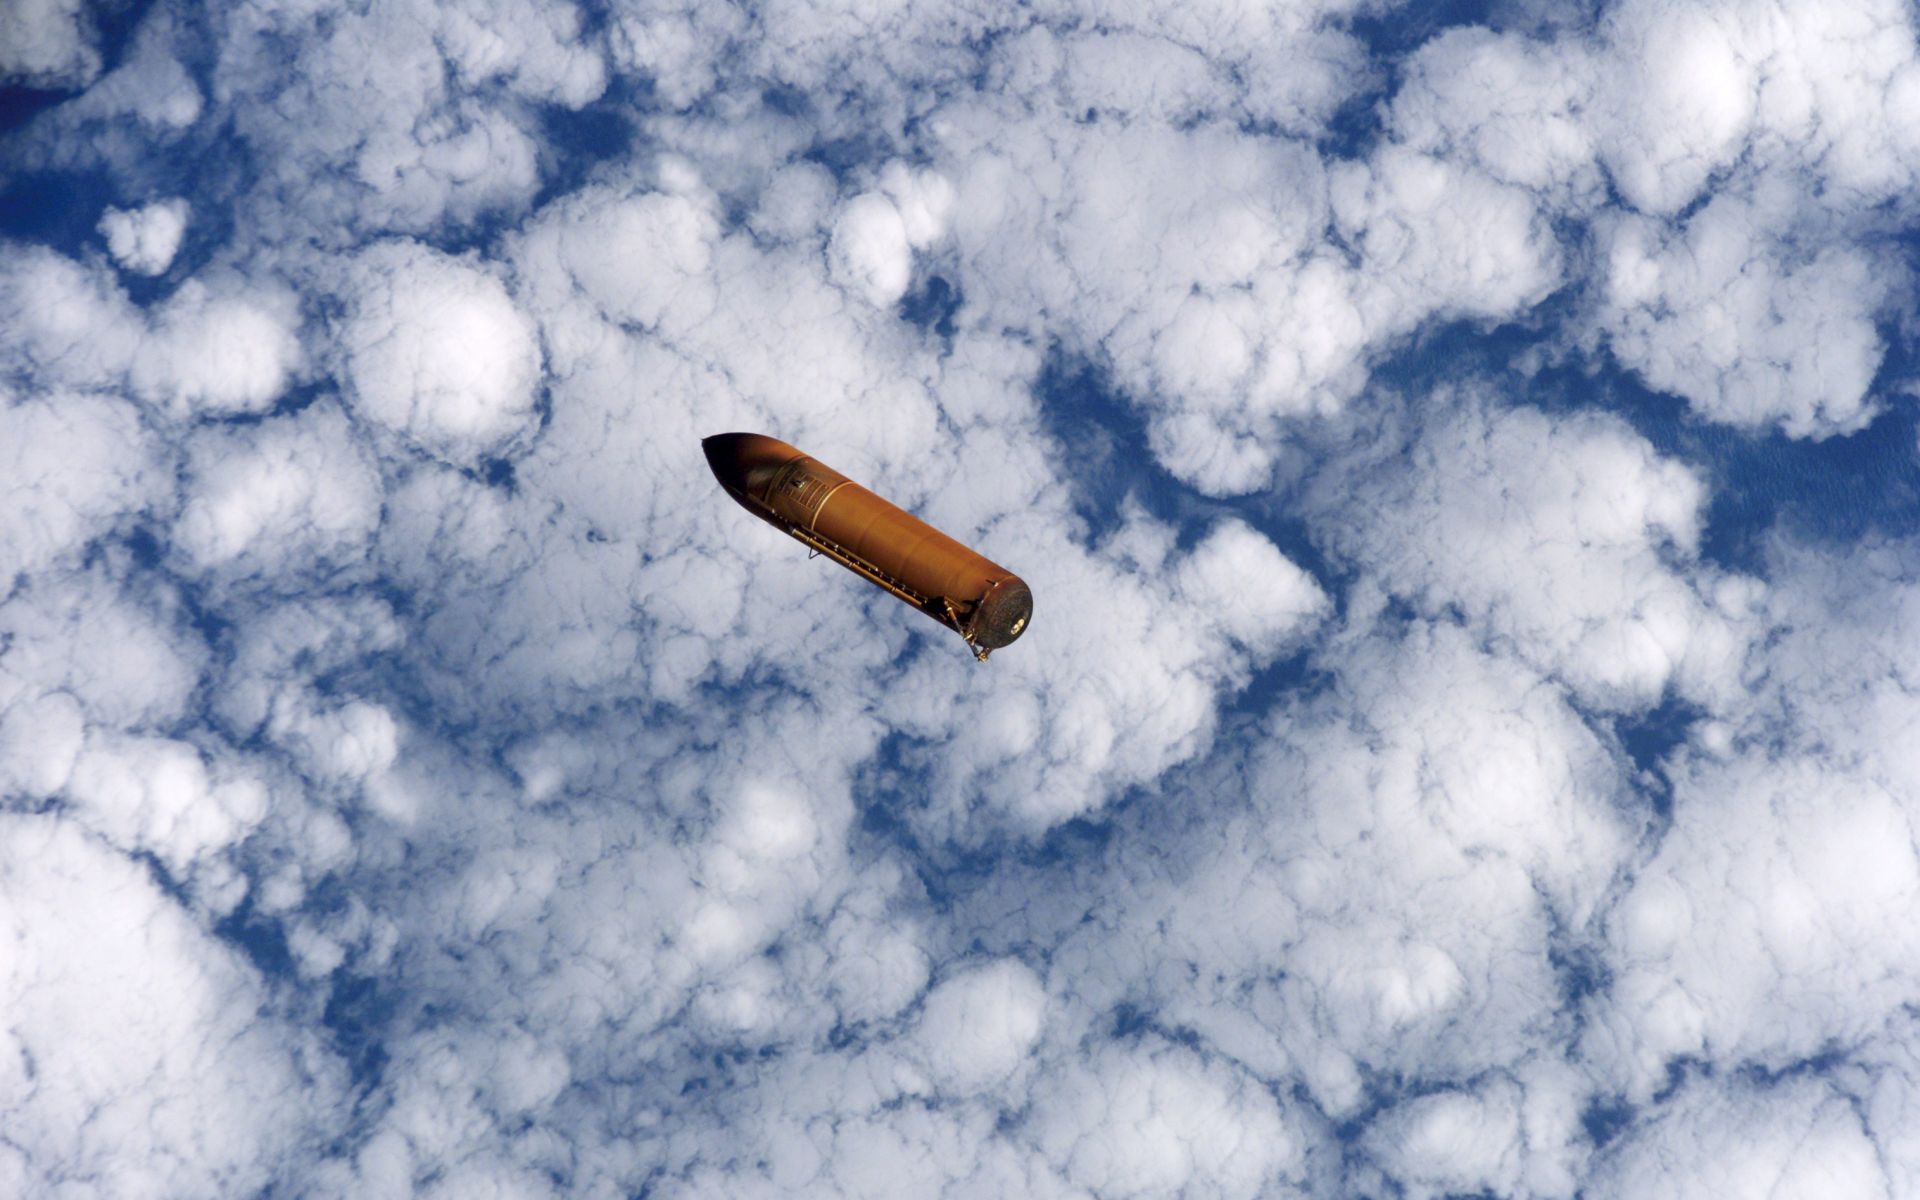 Falling external fuel tank against the sky